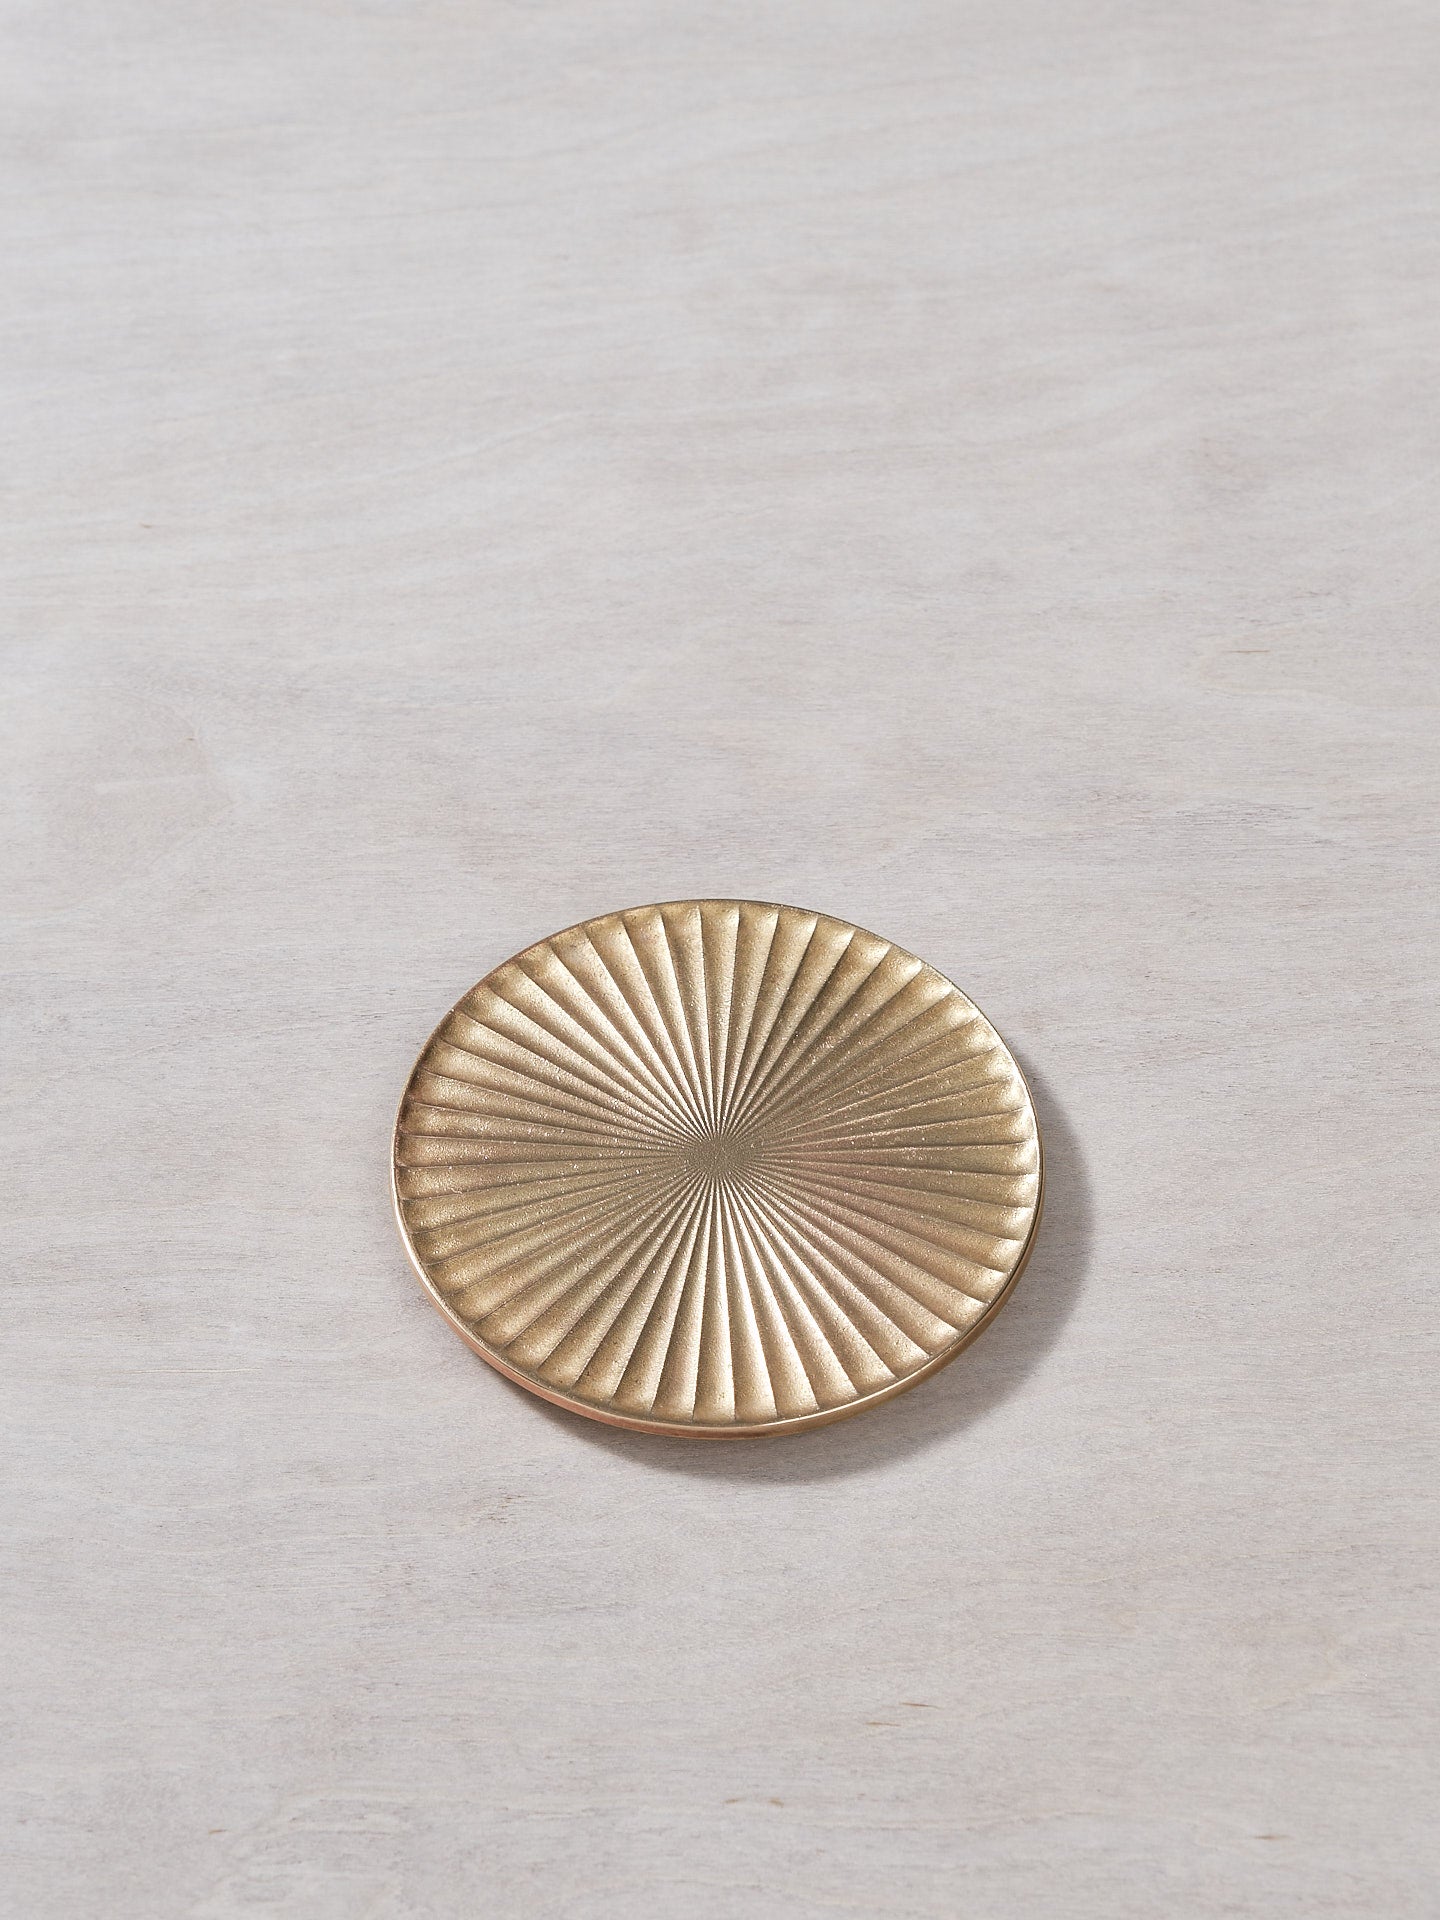 A Futagami Kobo Coaster - Solid Brass plate on a wooden surface.